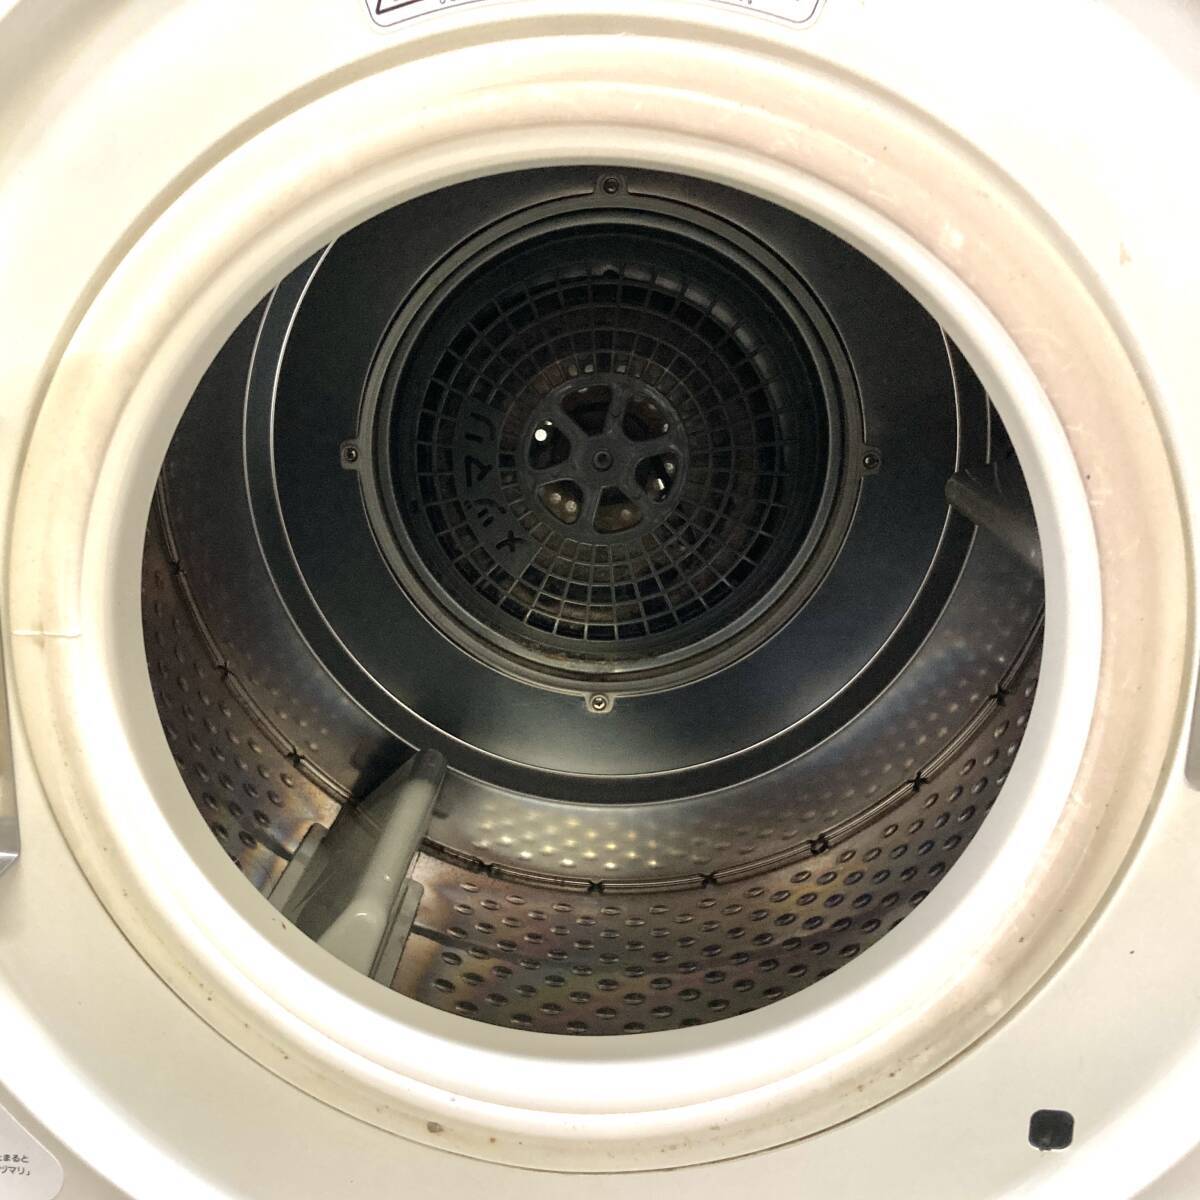 *SANYO CD-S45C1(W) coin type dryer electro- machine dryer dry capacity 4.5kg 100V exclusive use dryer coin laundry Sanyo key attaching operation not yet verification 